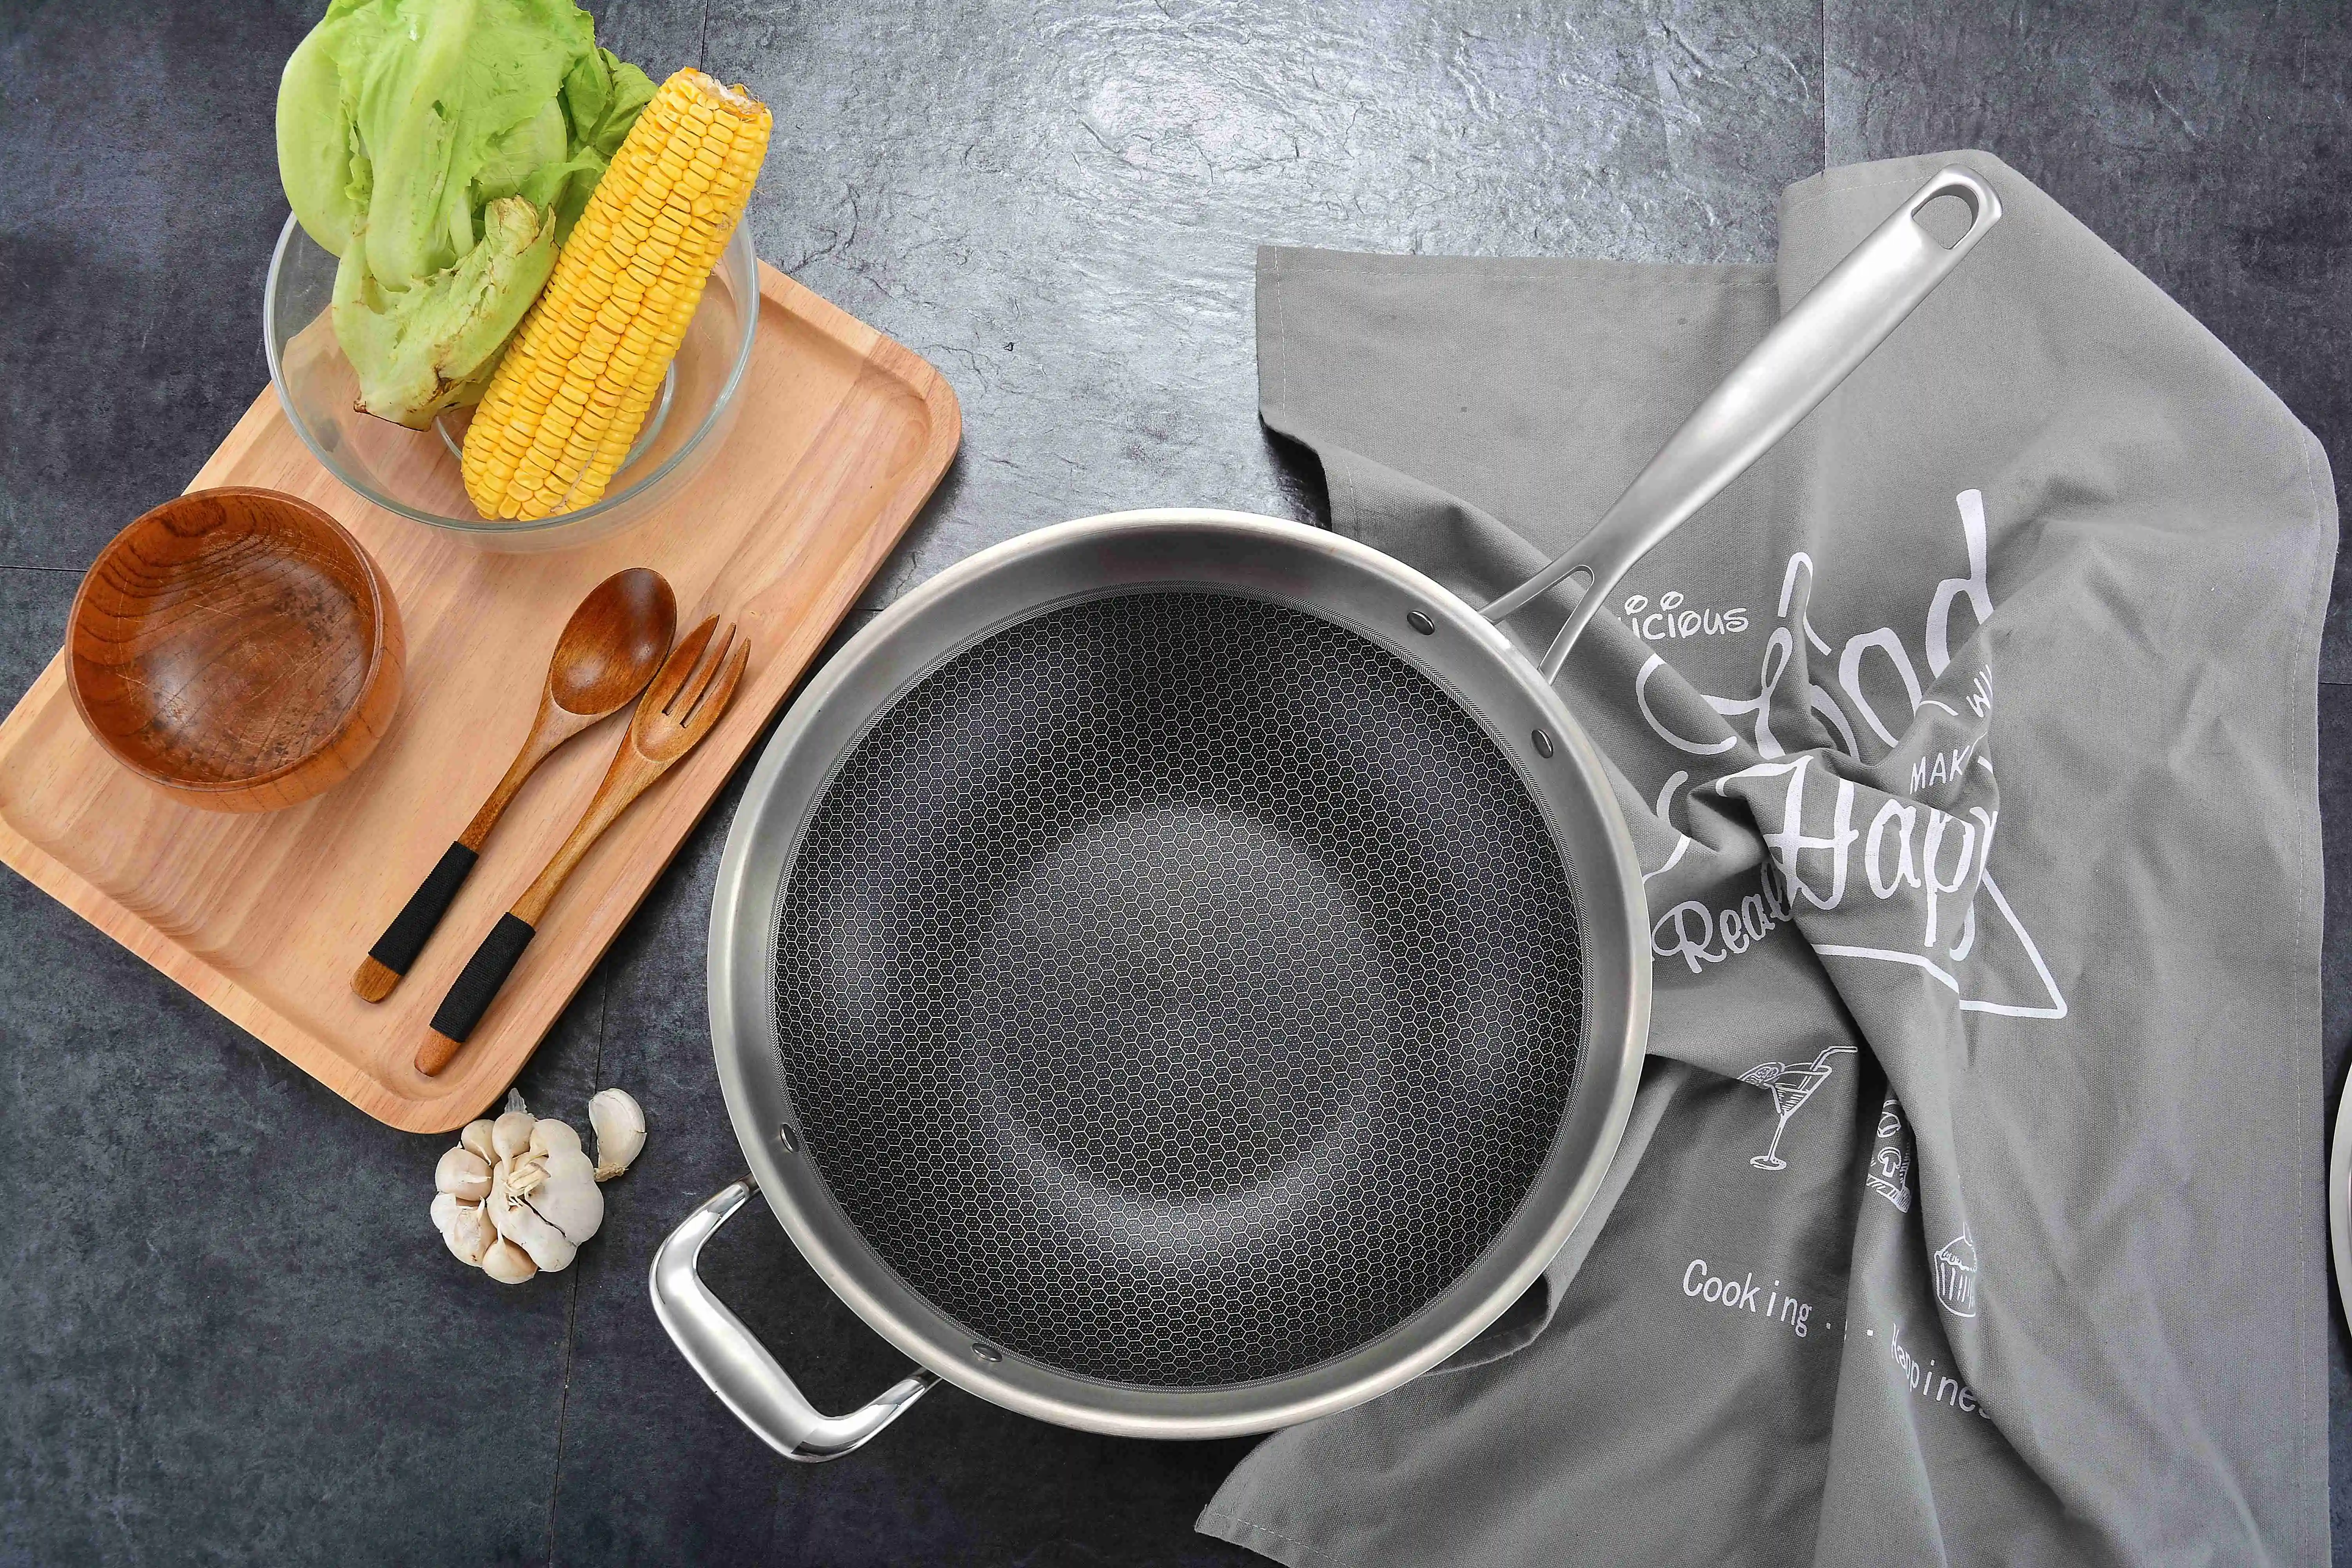 HEXCLAD PAN HYBRID Stainless Steel/Non-Stick Tri-Ply 12-inch Wok LOOK READ  ALL $50.00 - PicClick